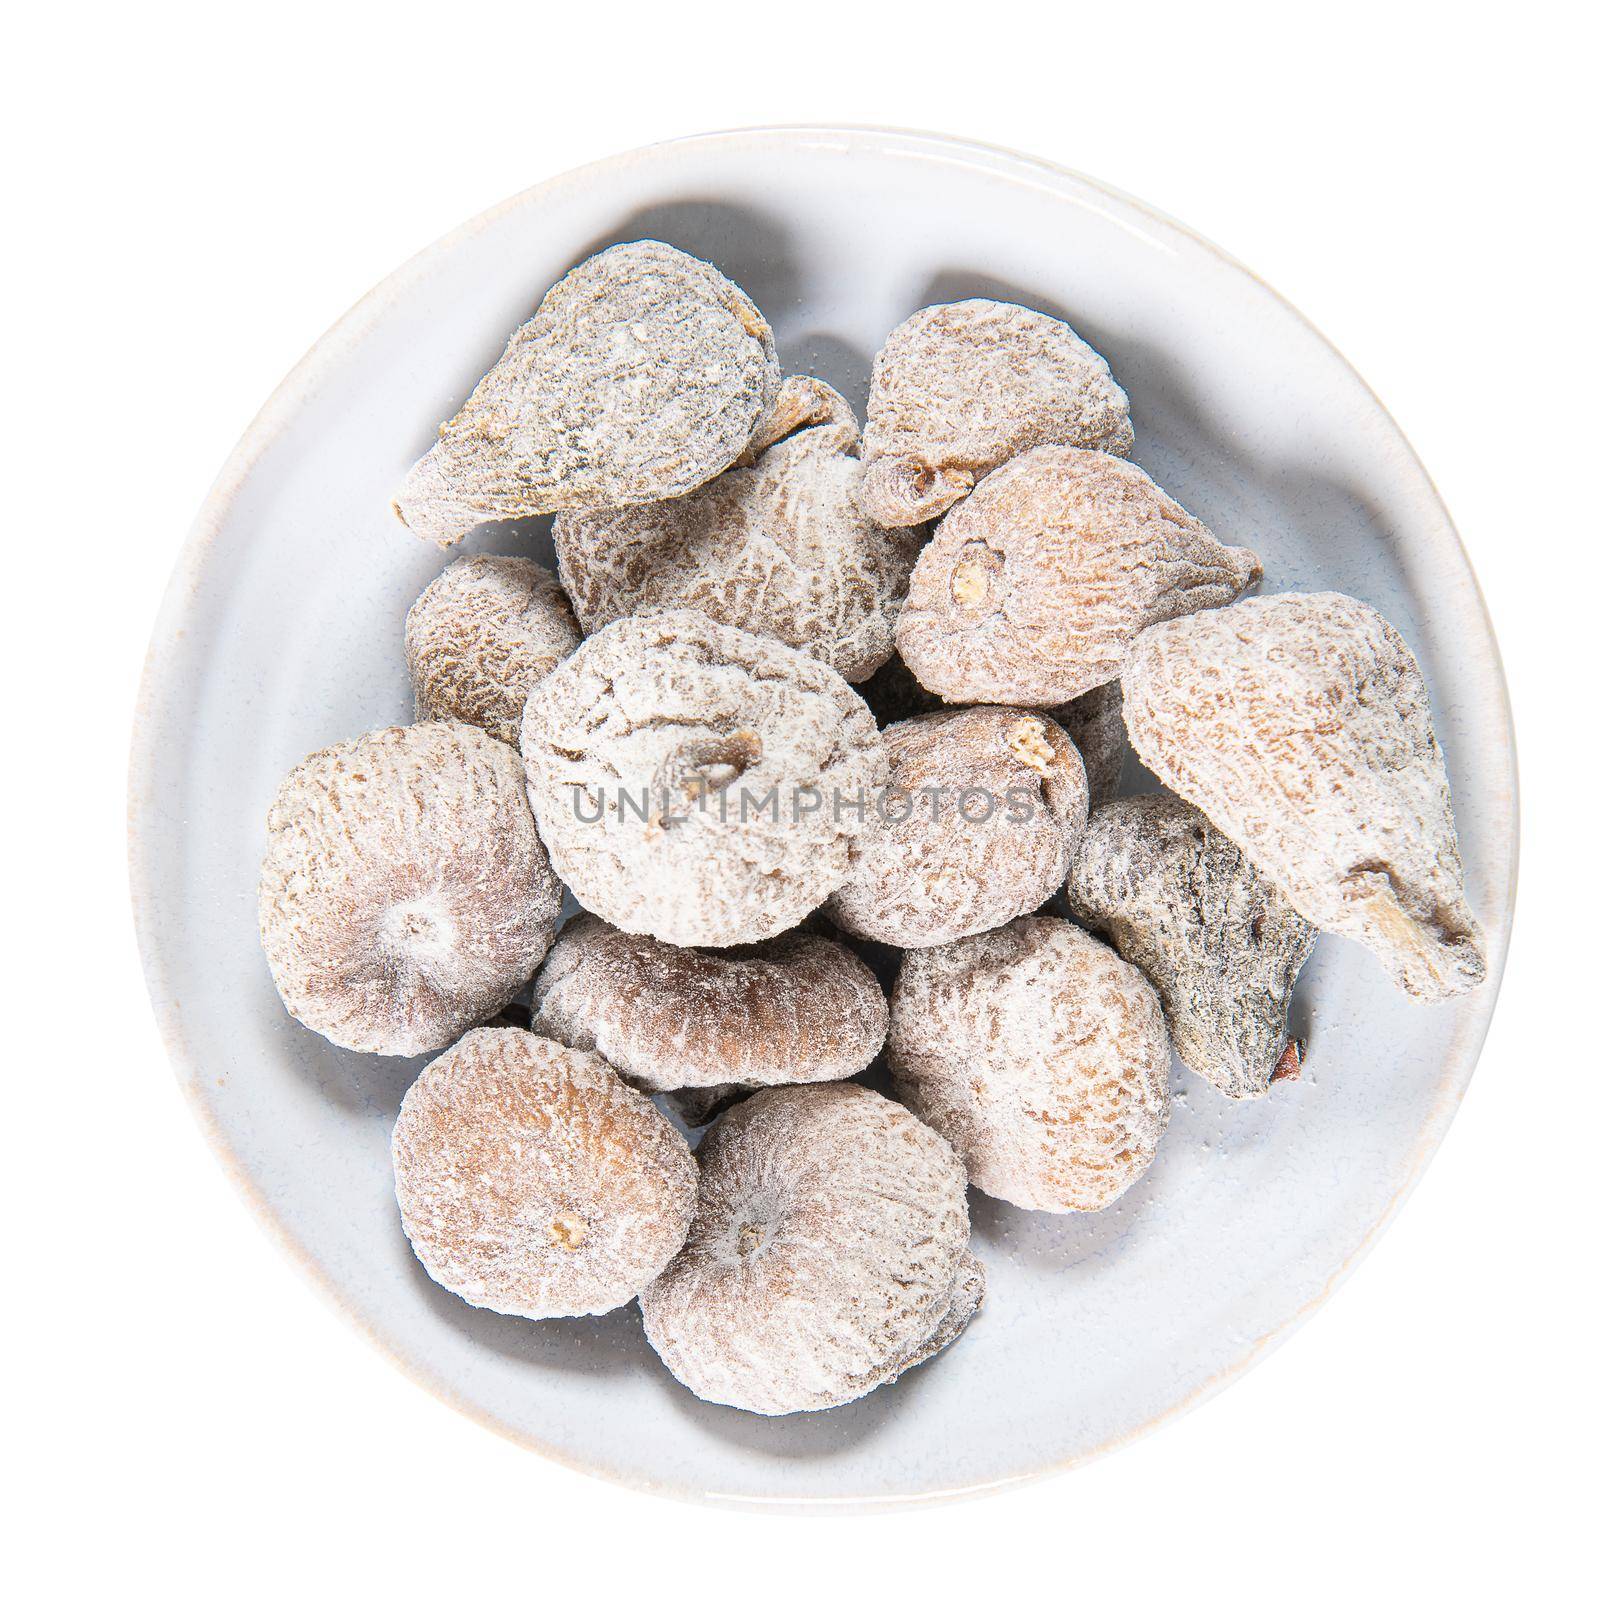 Dried figs in a white ceramic bowl. Dried fruit with copy space for text. Top view. Figs isolated on white background.